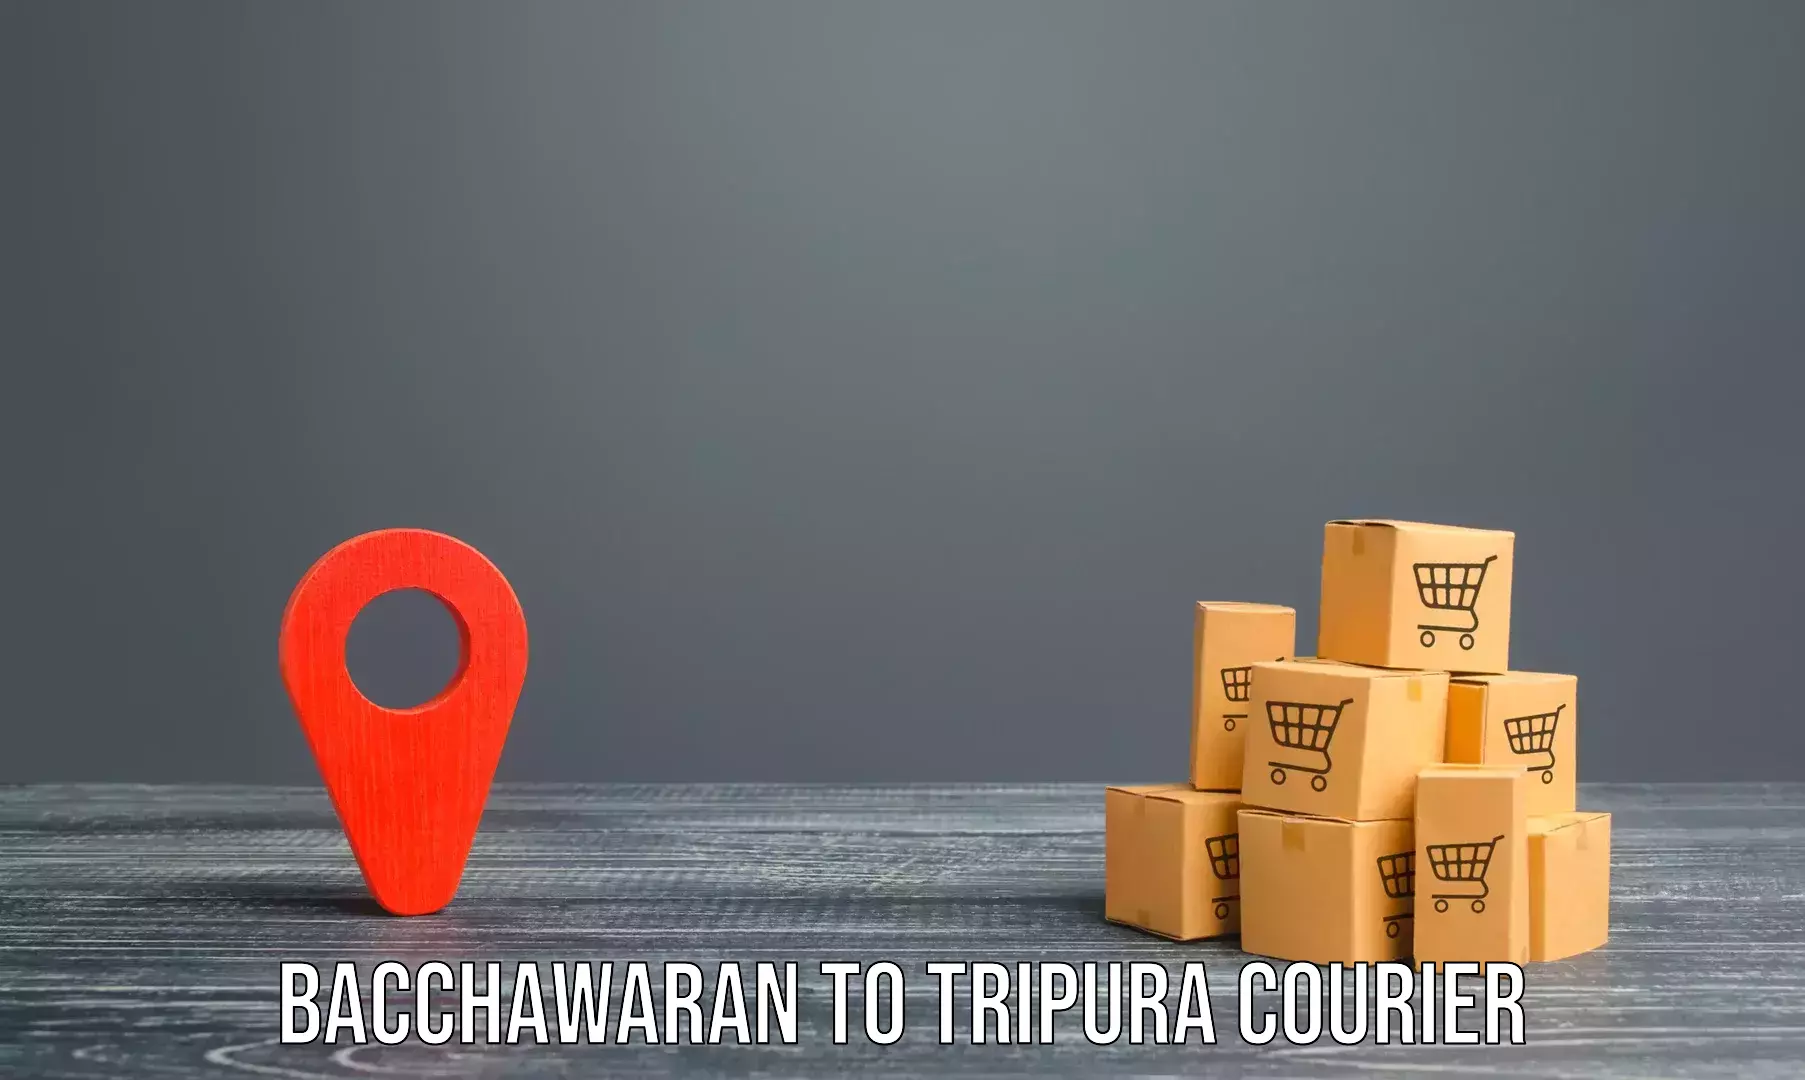 Trusted relocation experts in Bacchawaran to Udaipur Tripura